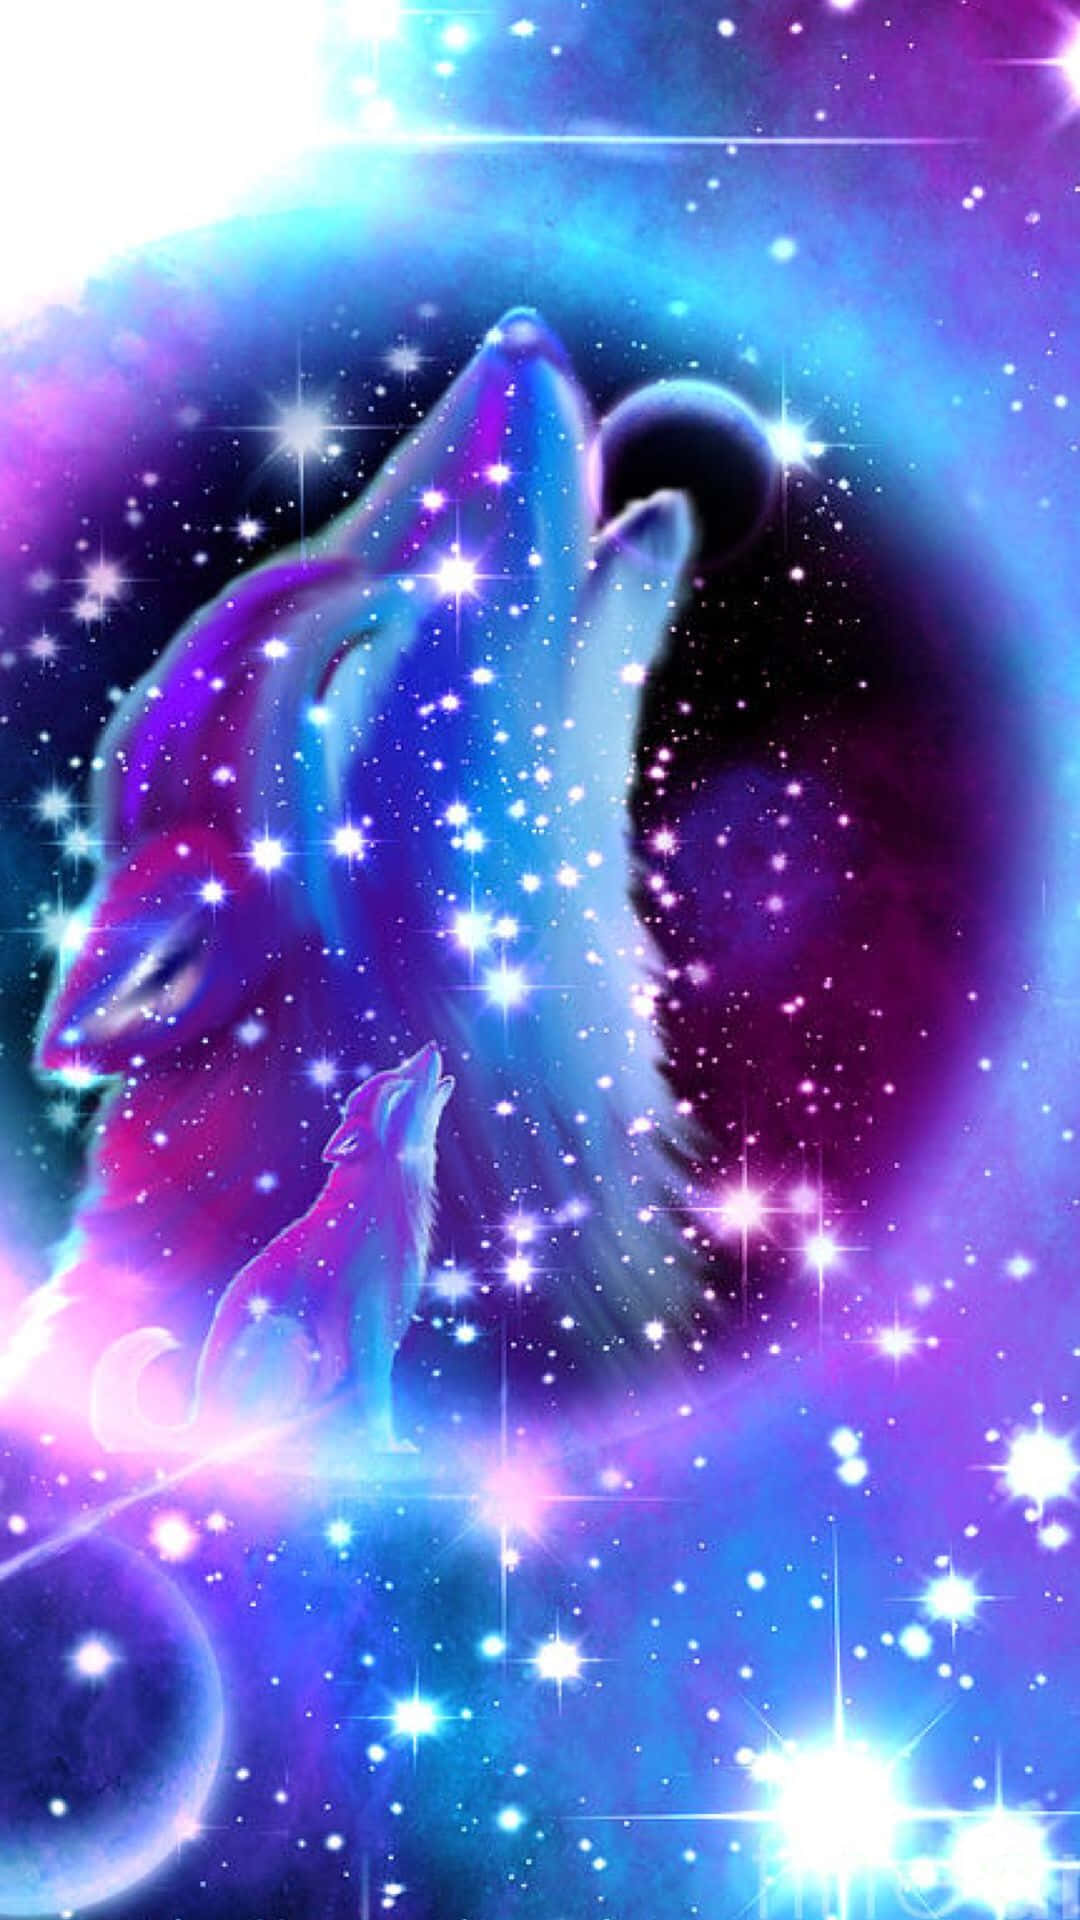 A fierce wolf howling at the night sky Wallpaper